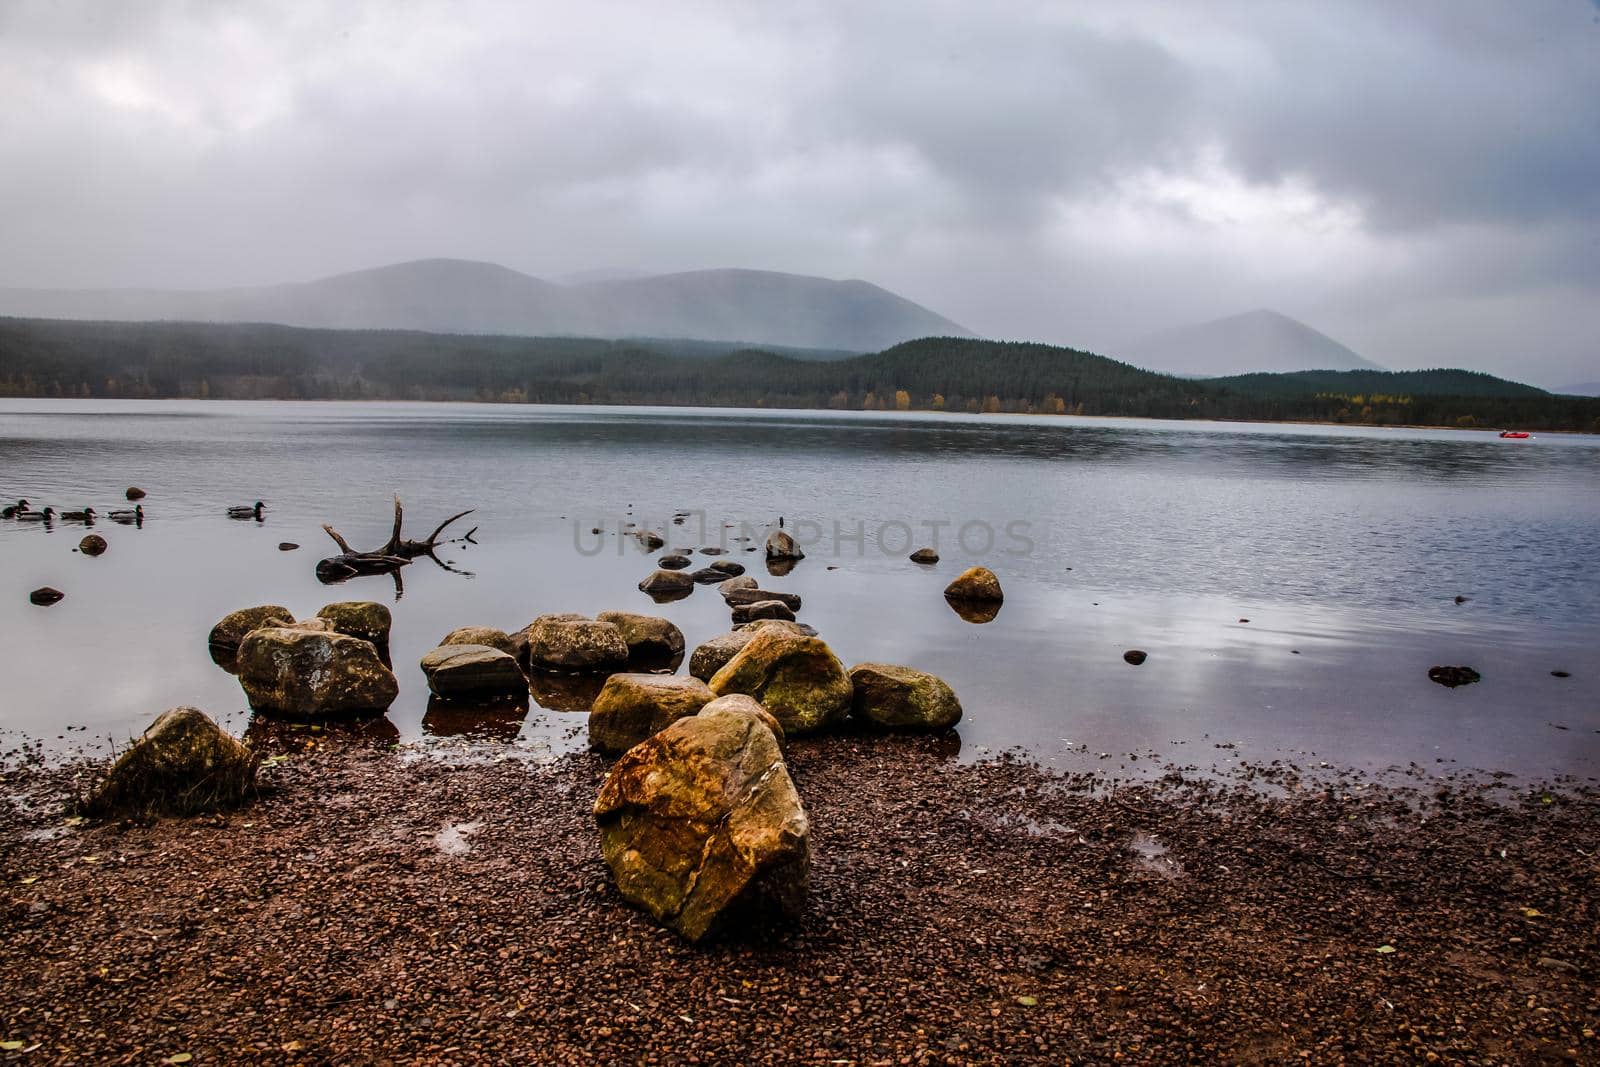 The beautiful Loch Morlich in Scotland, Cairngorm Mountains, United Kingdom by Weltblick